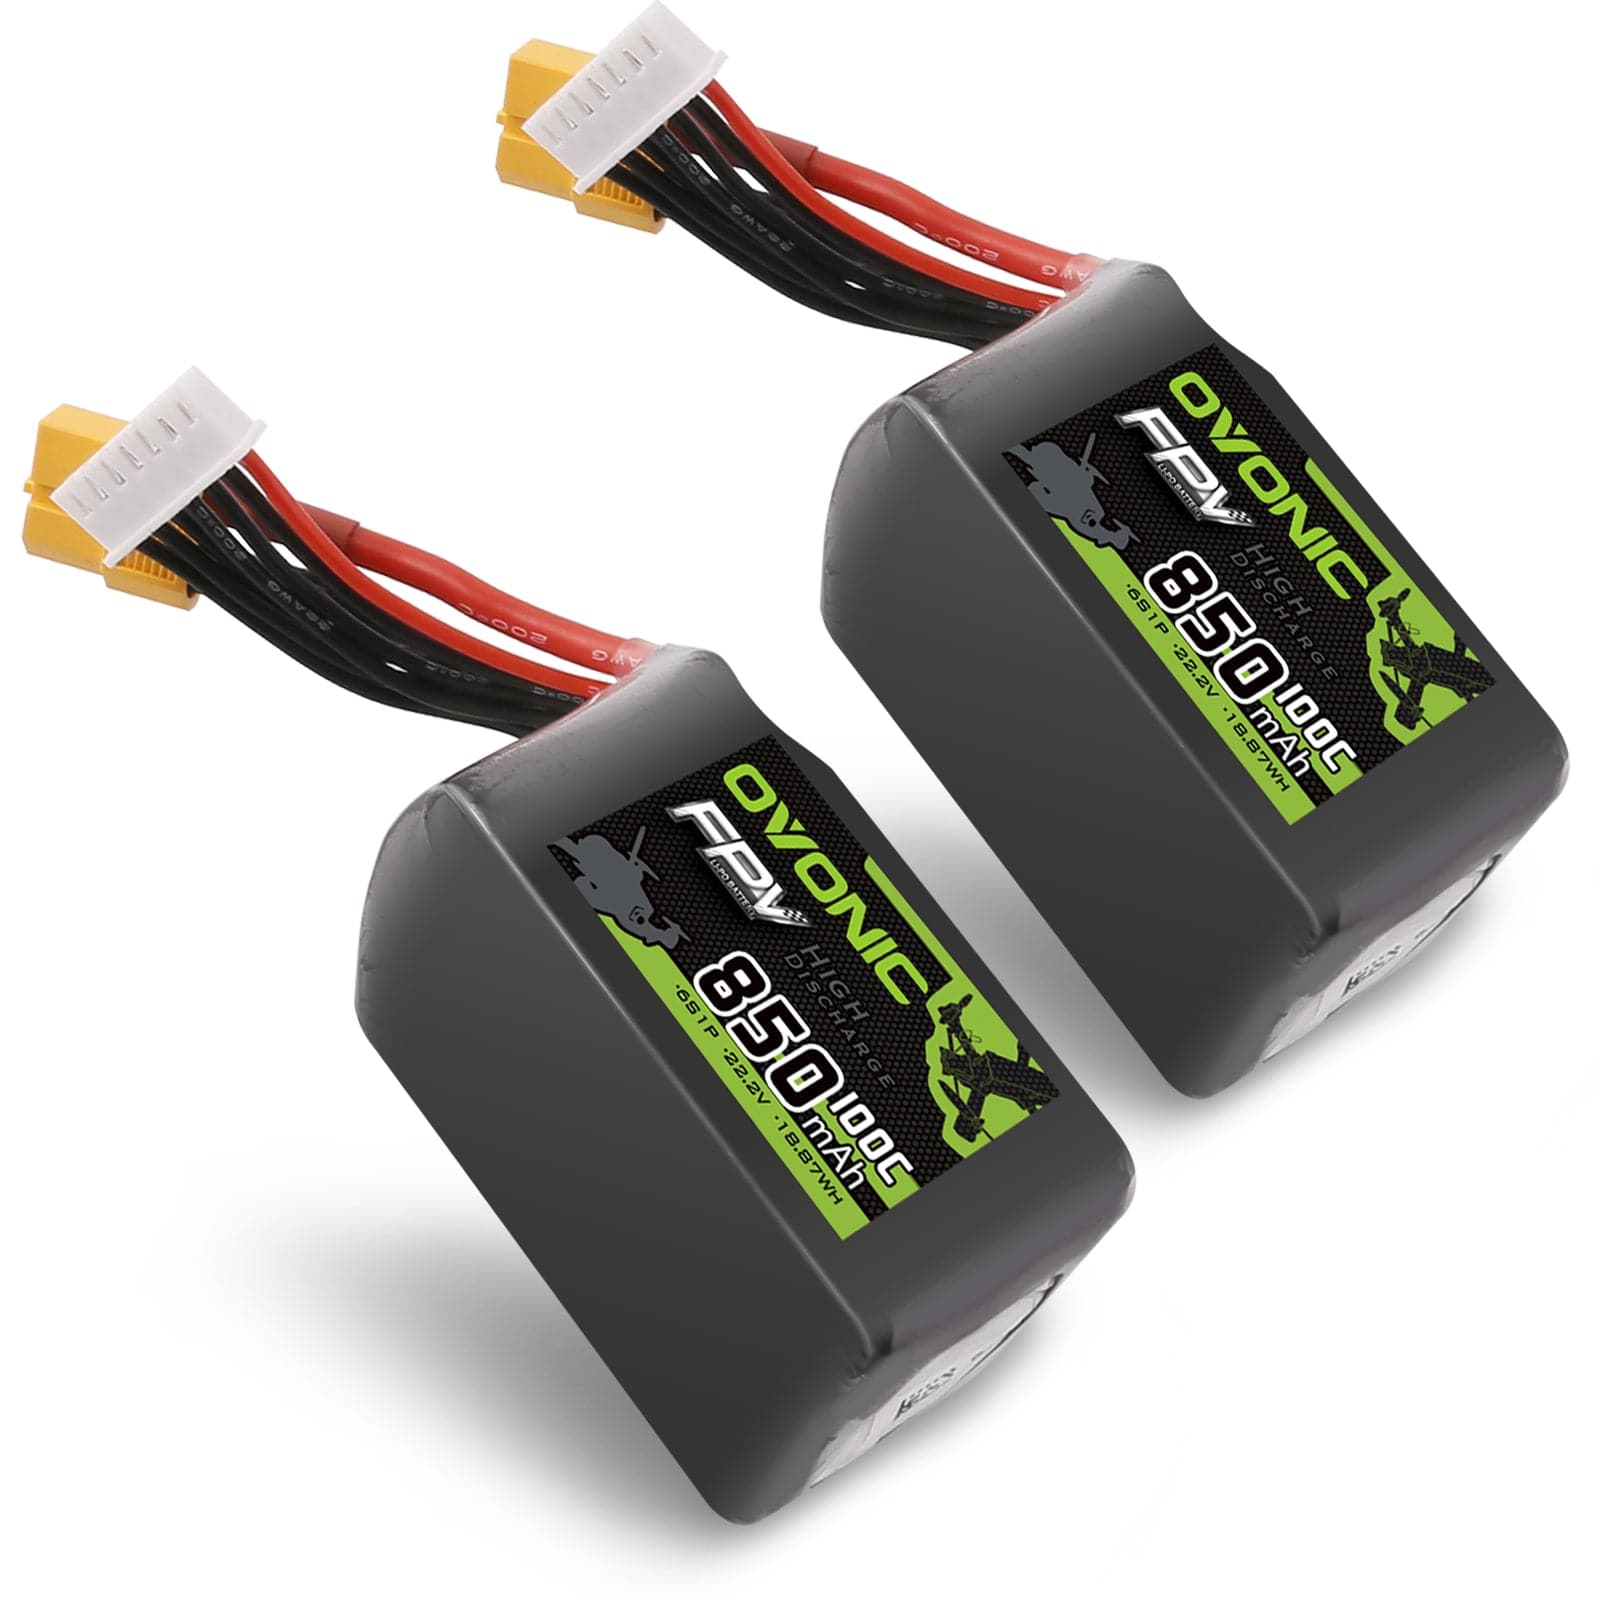 2x Ovonic 100C 6S 850mah Lipo Battery 22.2V Pack with XT60 Plug for fpv freestyle